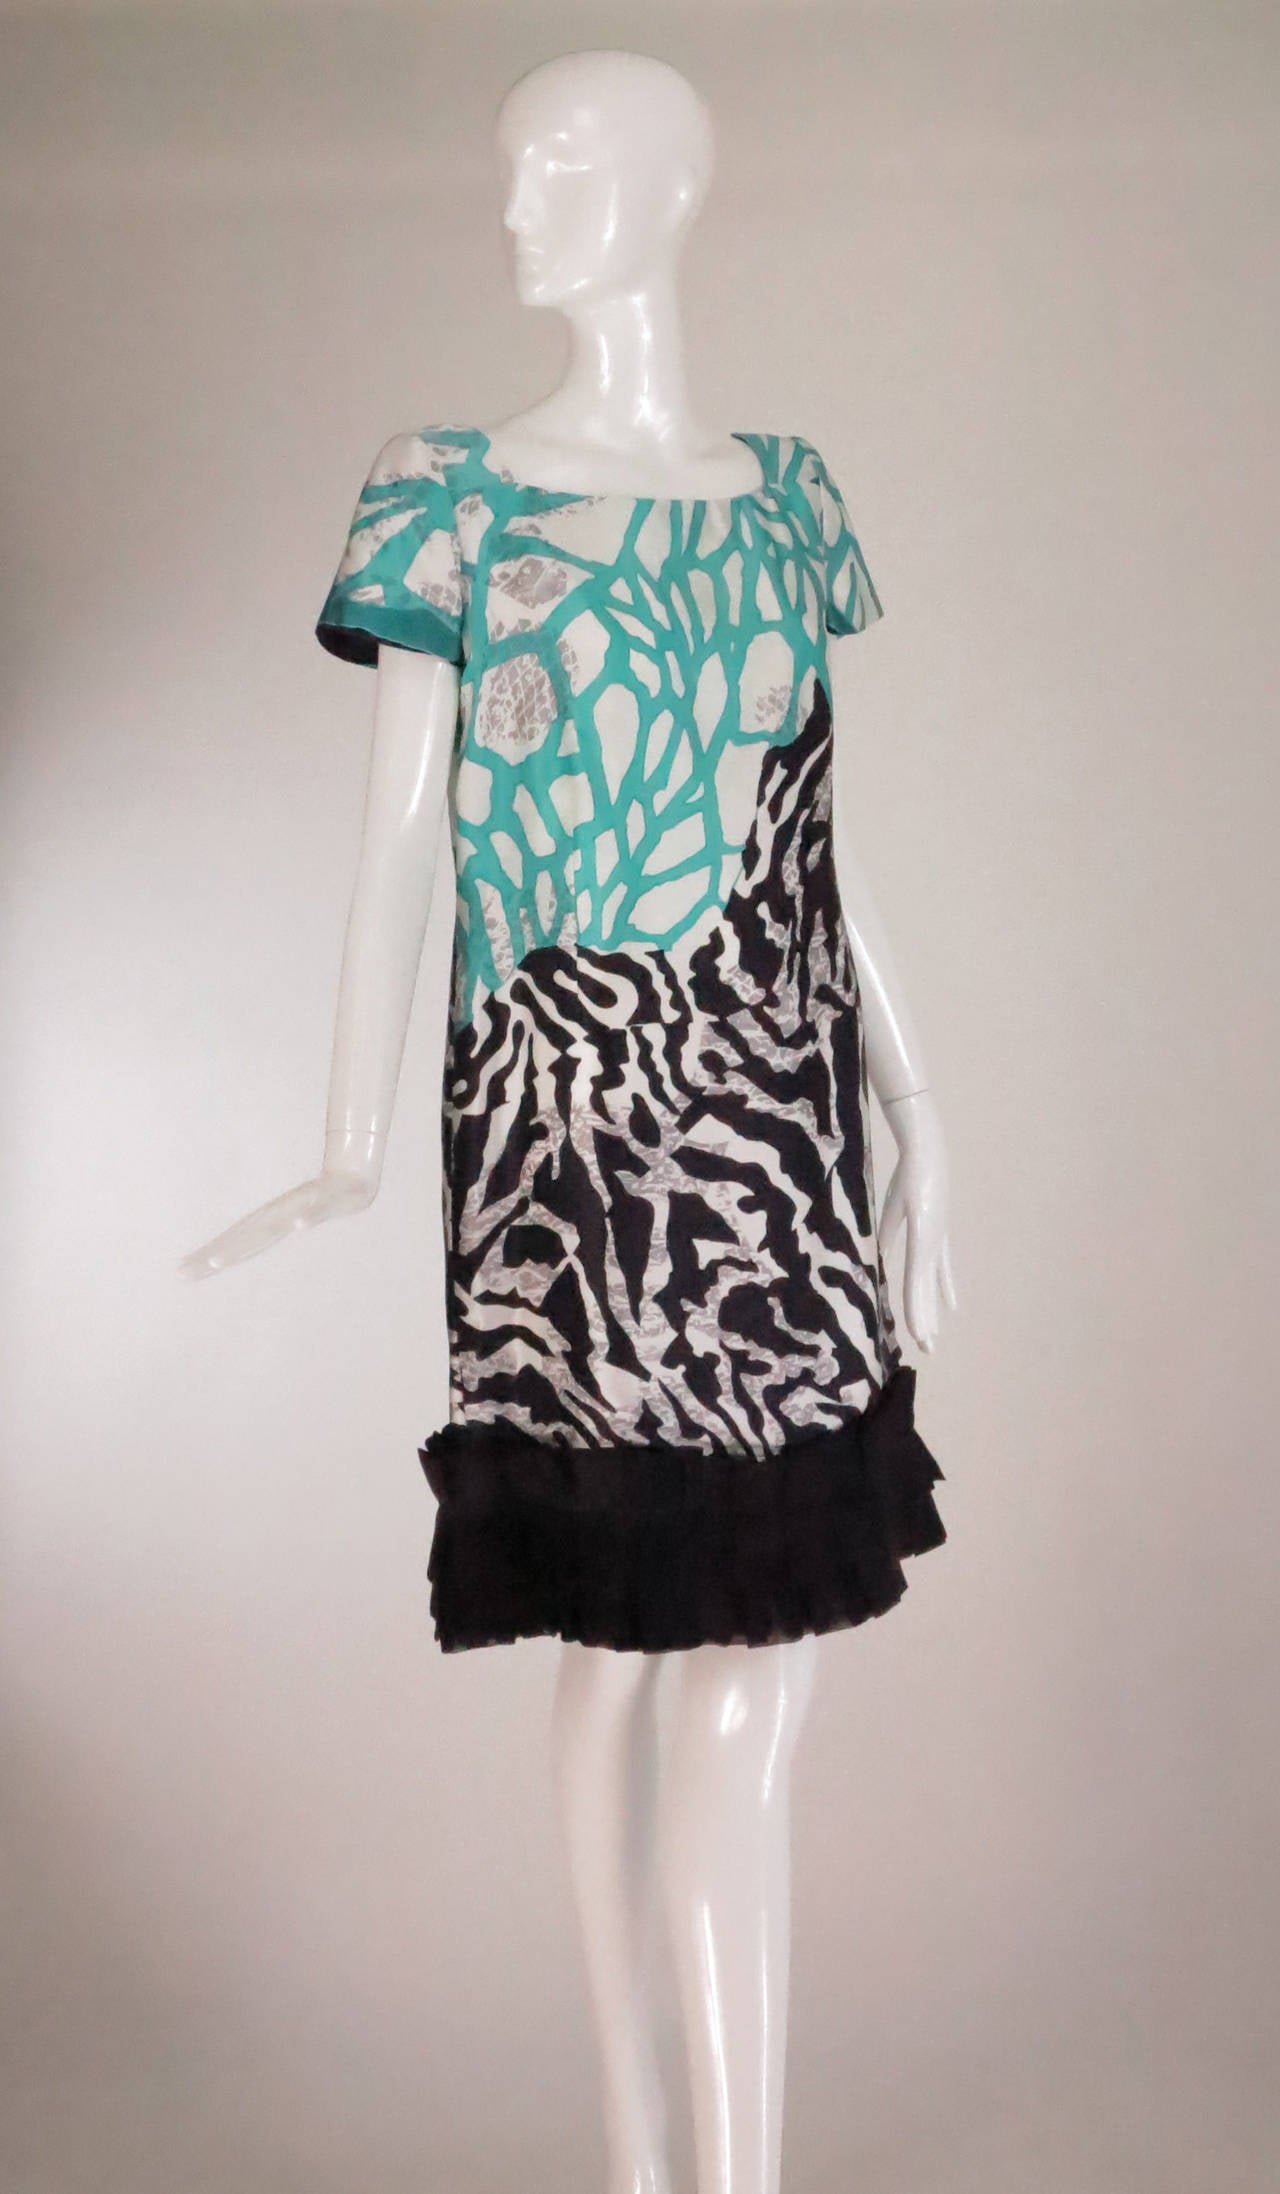 Palm Beach favourite designer, Paola Quadretti designs resort worthy dresses that are casually elegant and feminine...Hand made, short sleeve printed silk dress in turquoise, ivory white and black with splashes of gray...A line dress skims the body